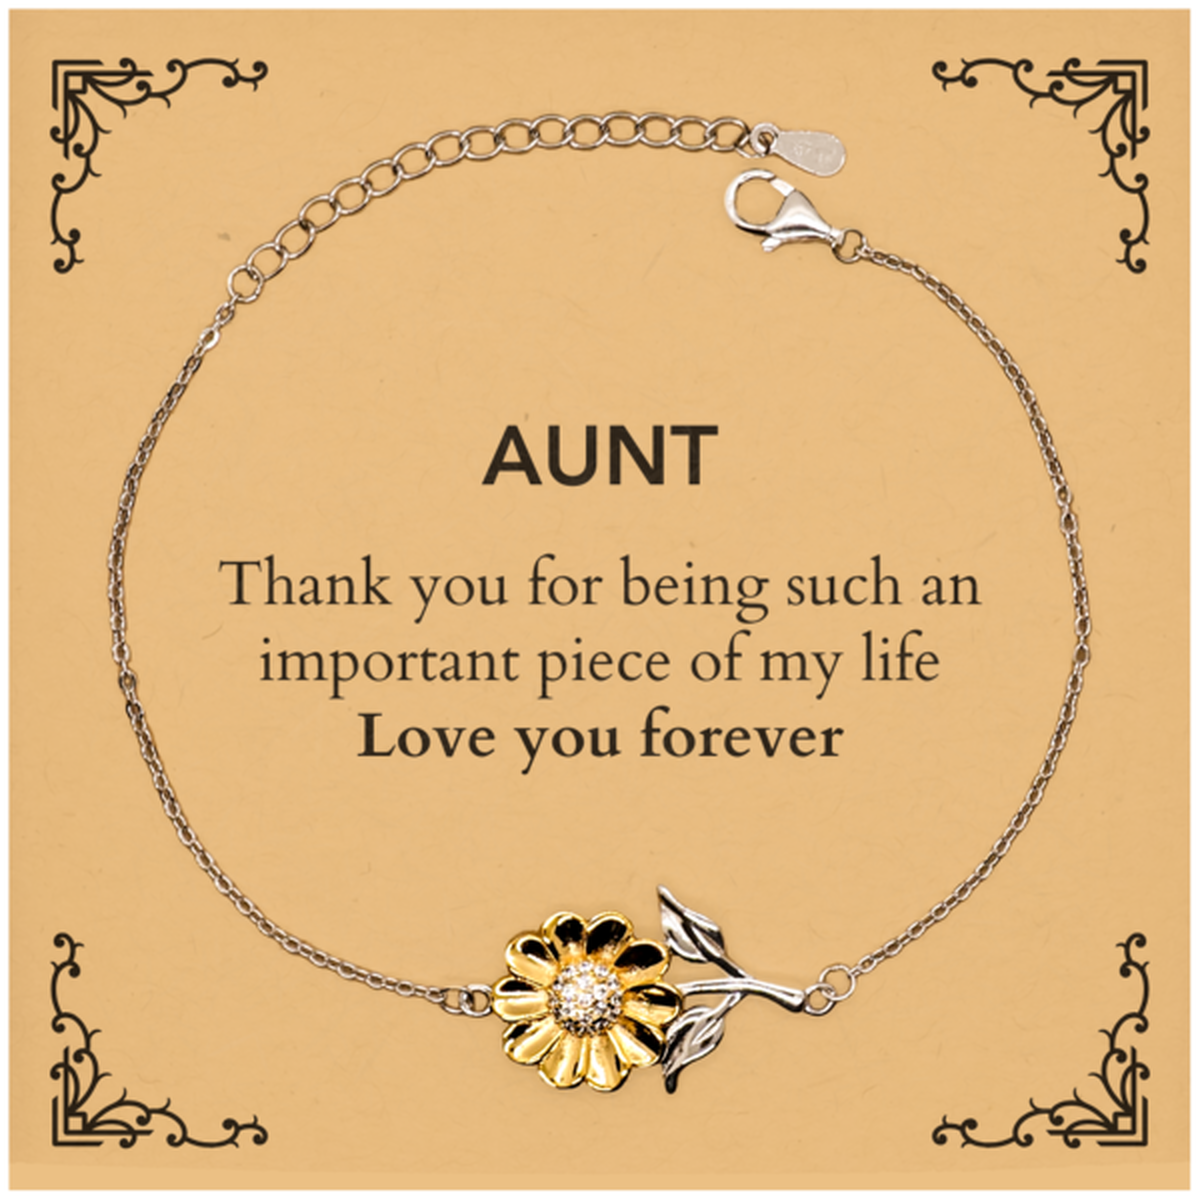 Appropriate Aunt Sunflower Bracelet Epic Birthday Gifts for Aunt Thank you for being such an important piece of my life Aunt Christmas Mothers Fathers Day